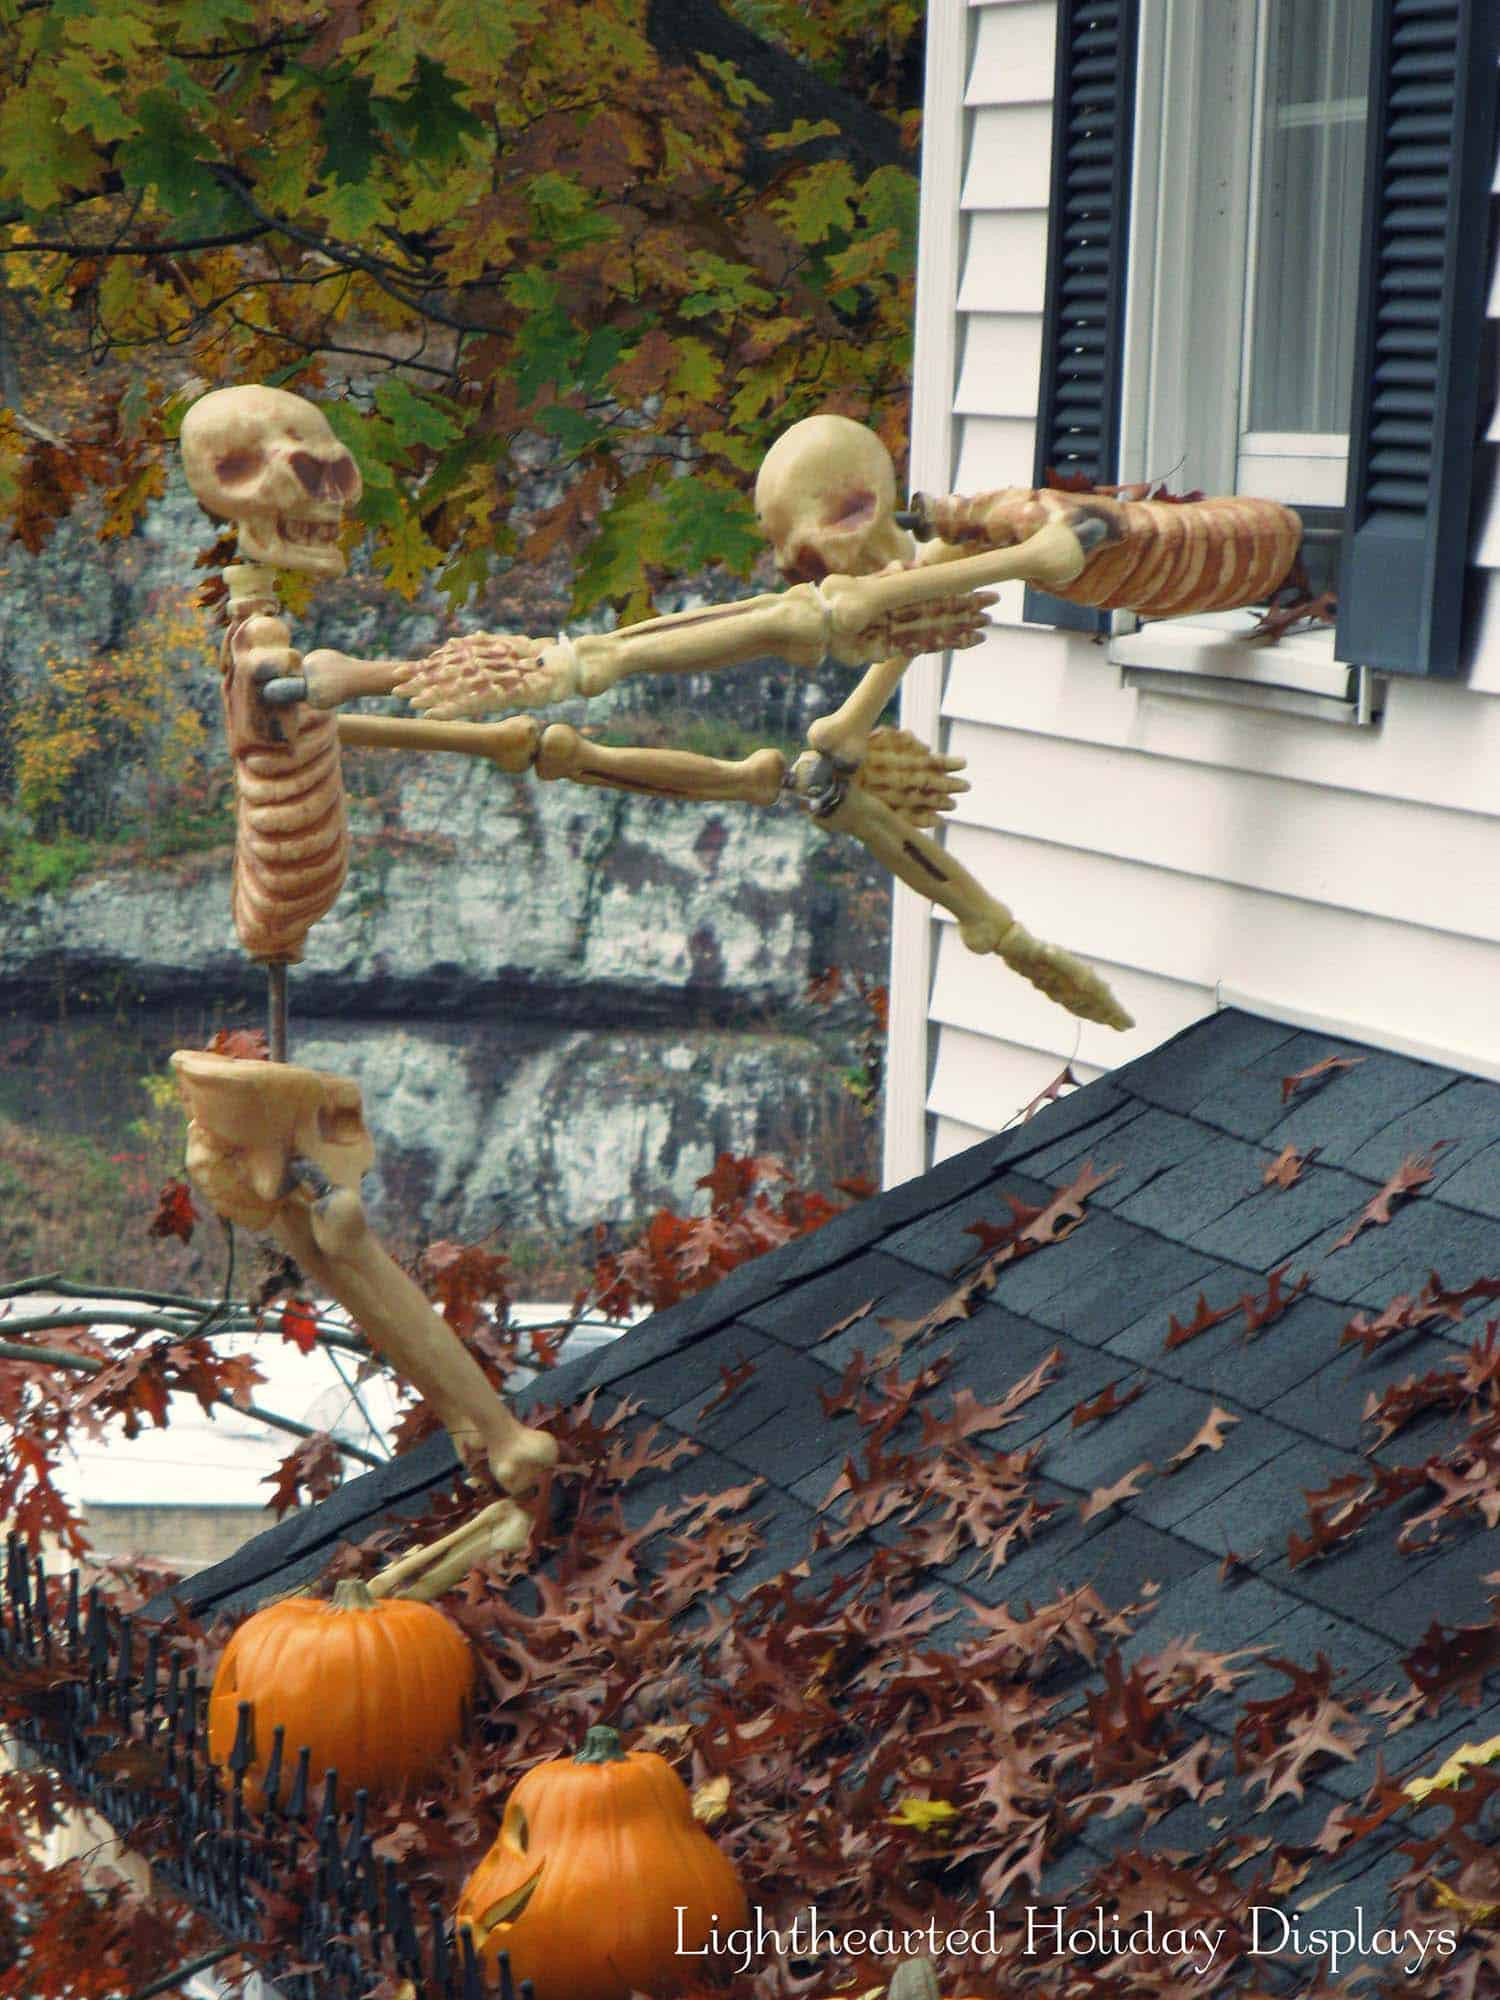 Halloween Outdoor Decorating Ideas
 21 Incredibly creepy outdoor decorating ideas for Halloween